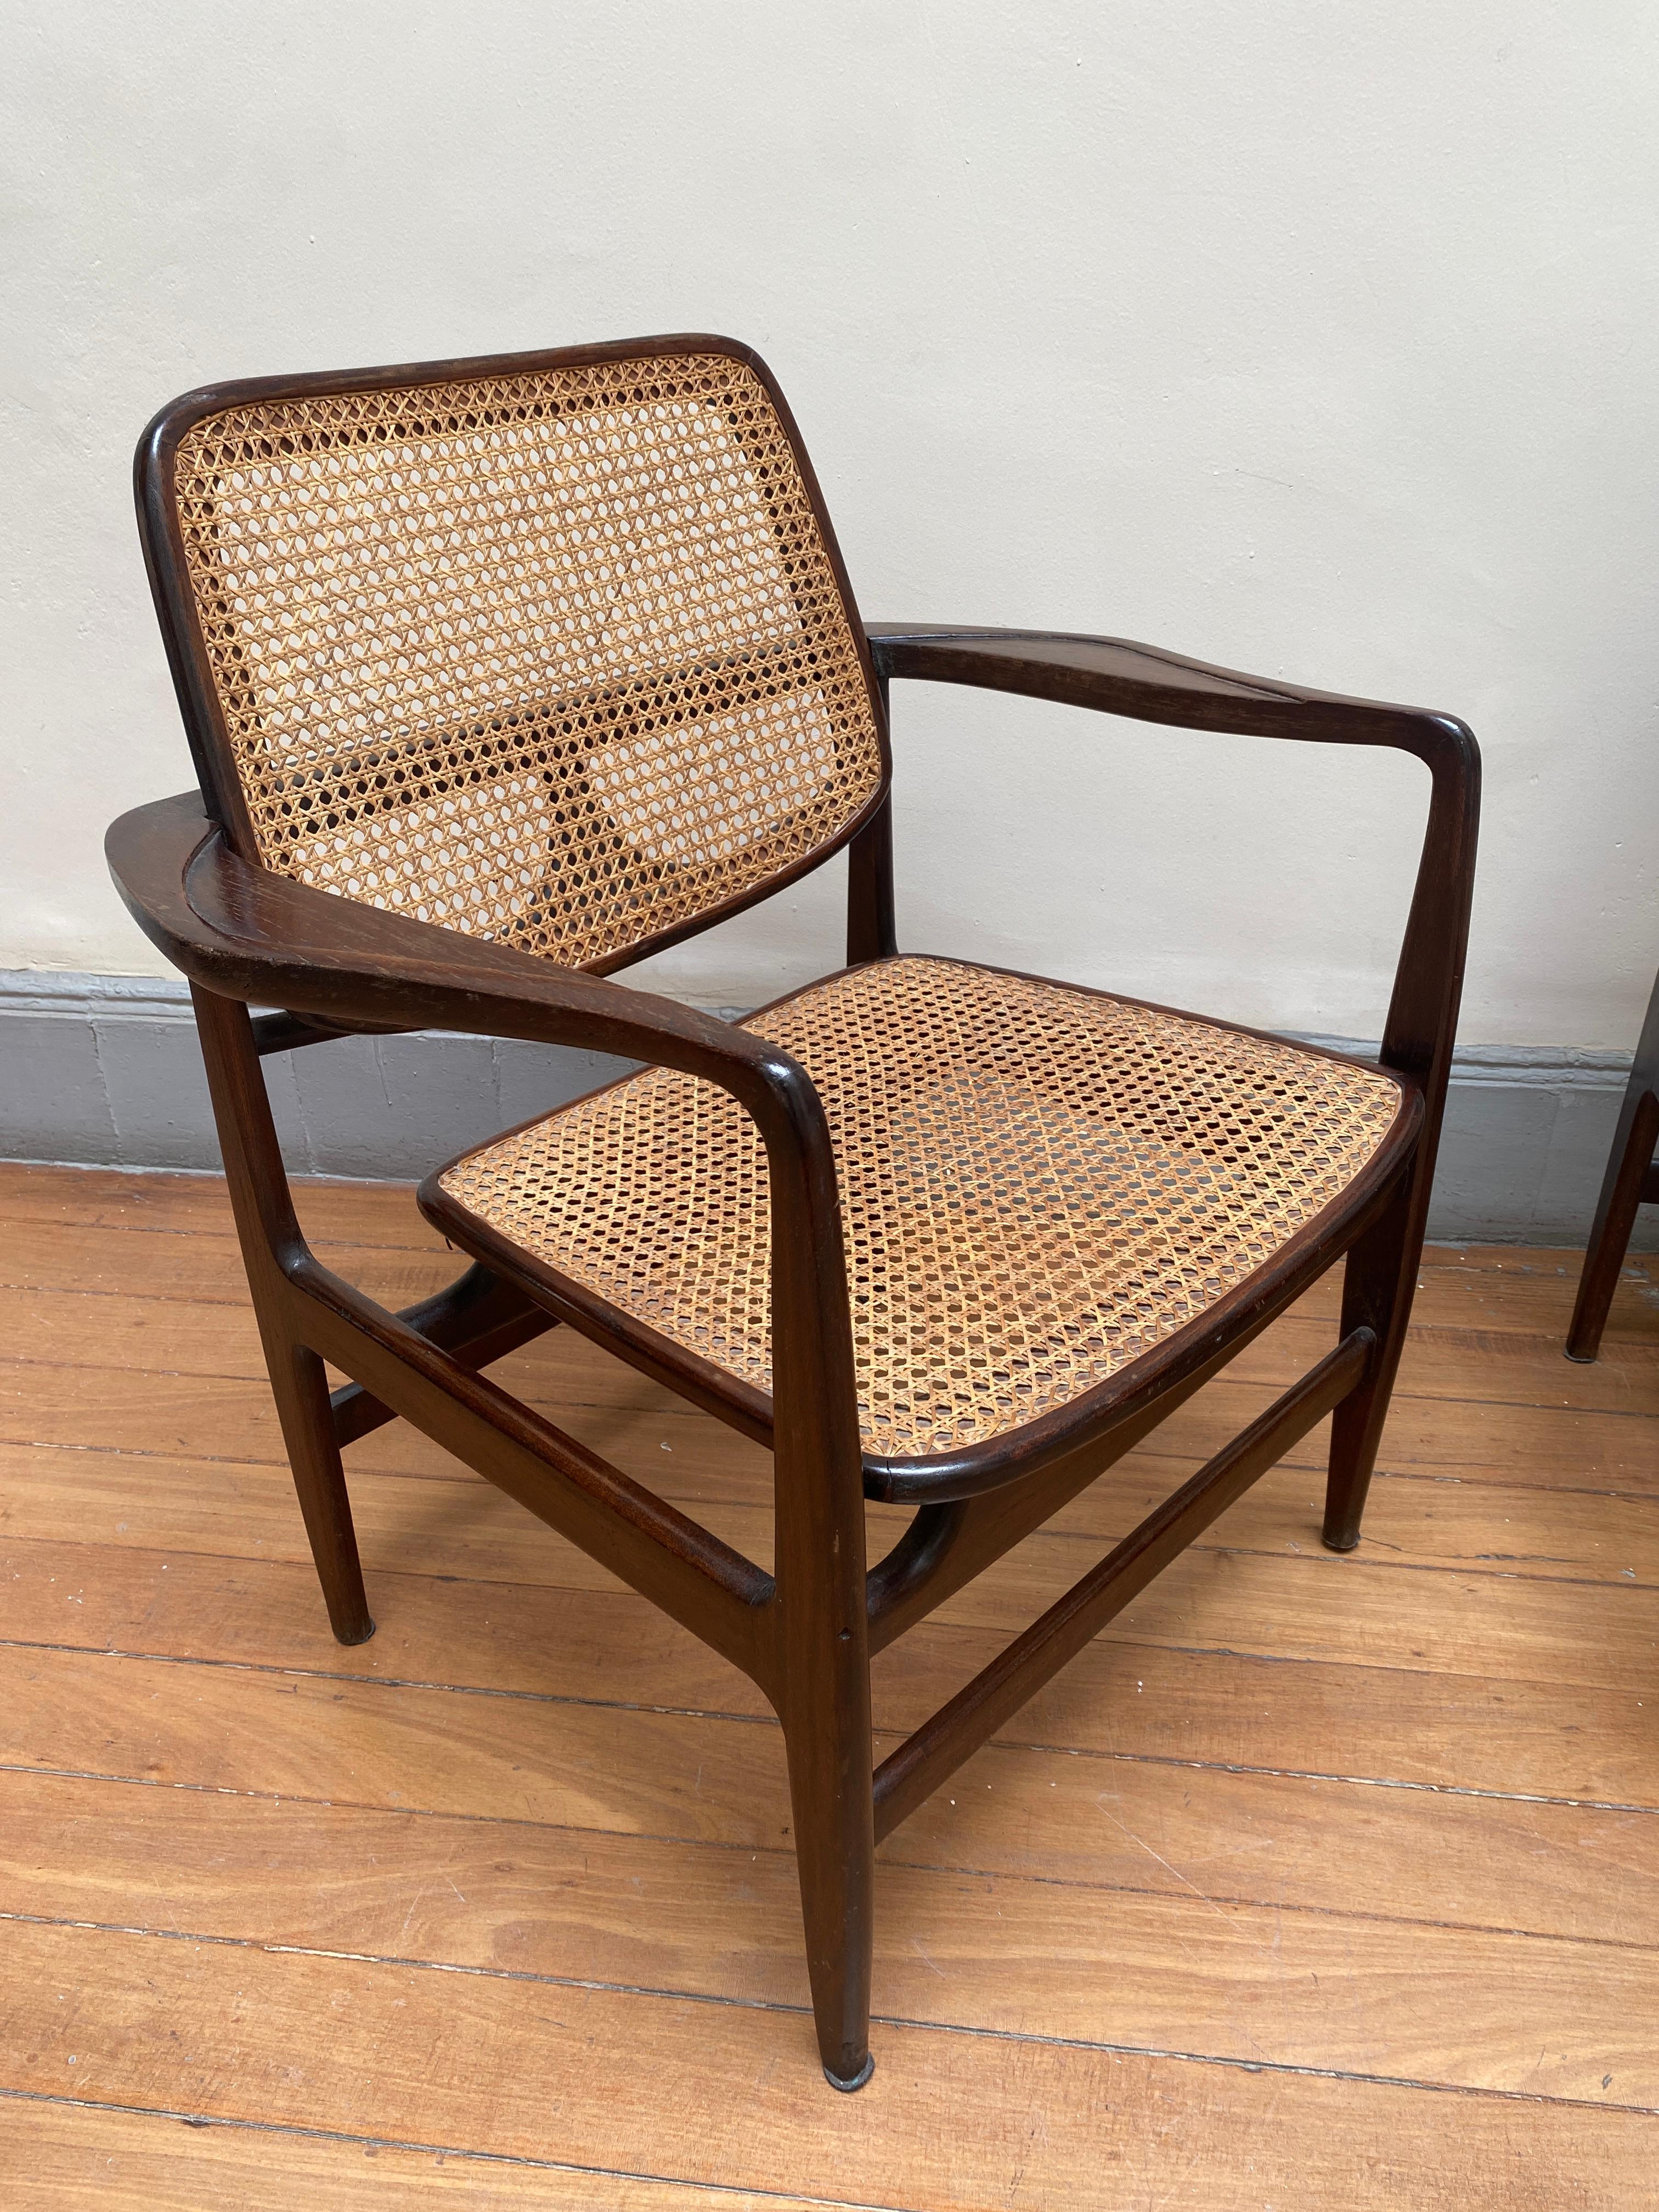 Mid-20th Century Set of Two Mid-Century Modern Oscar Armchairs by Sergio Rodrigues, Brazil, 1956 For Sale